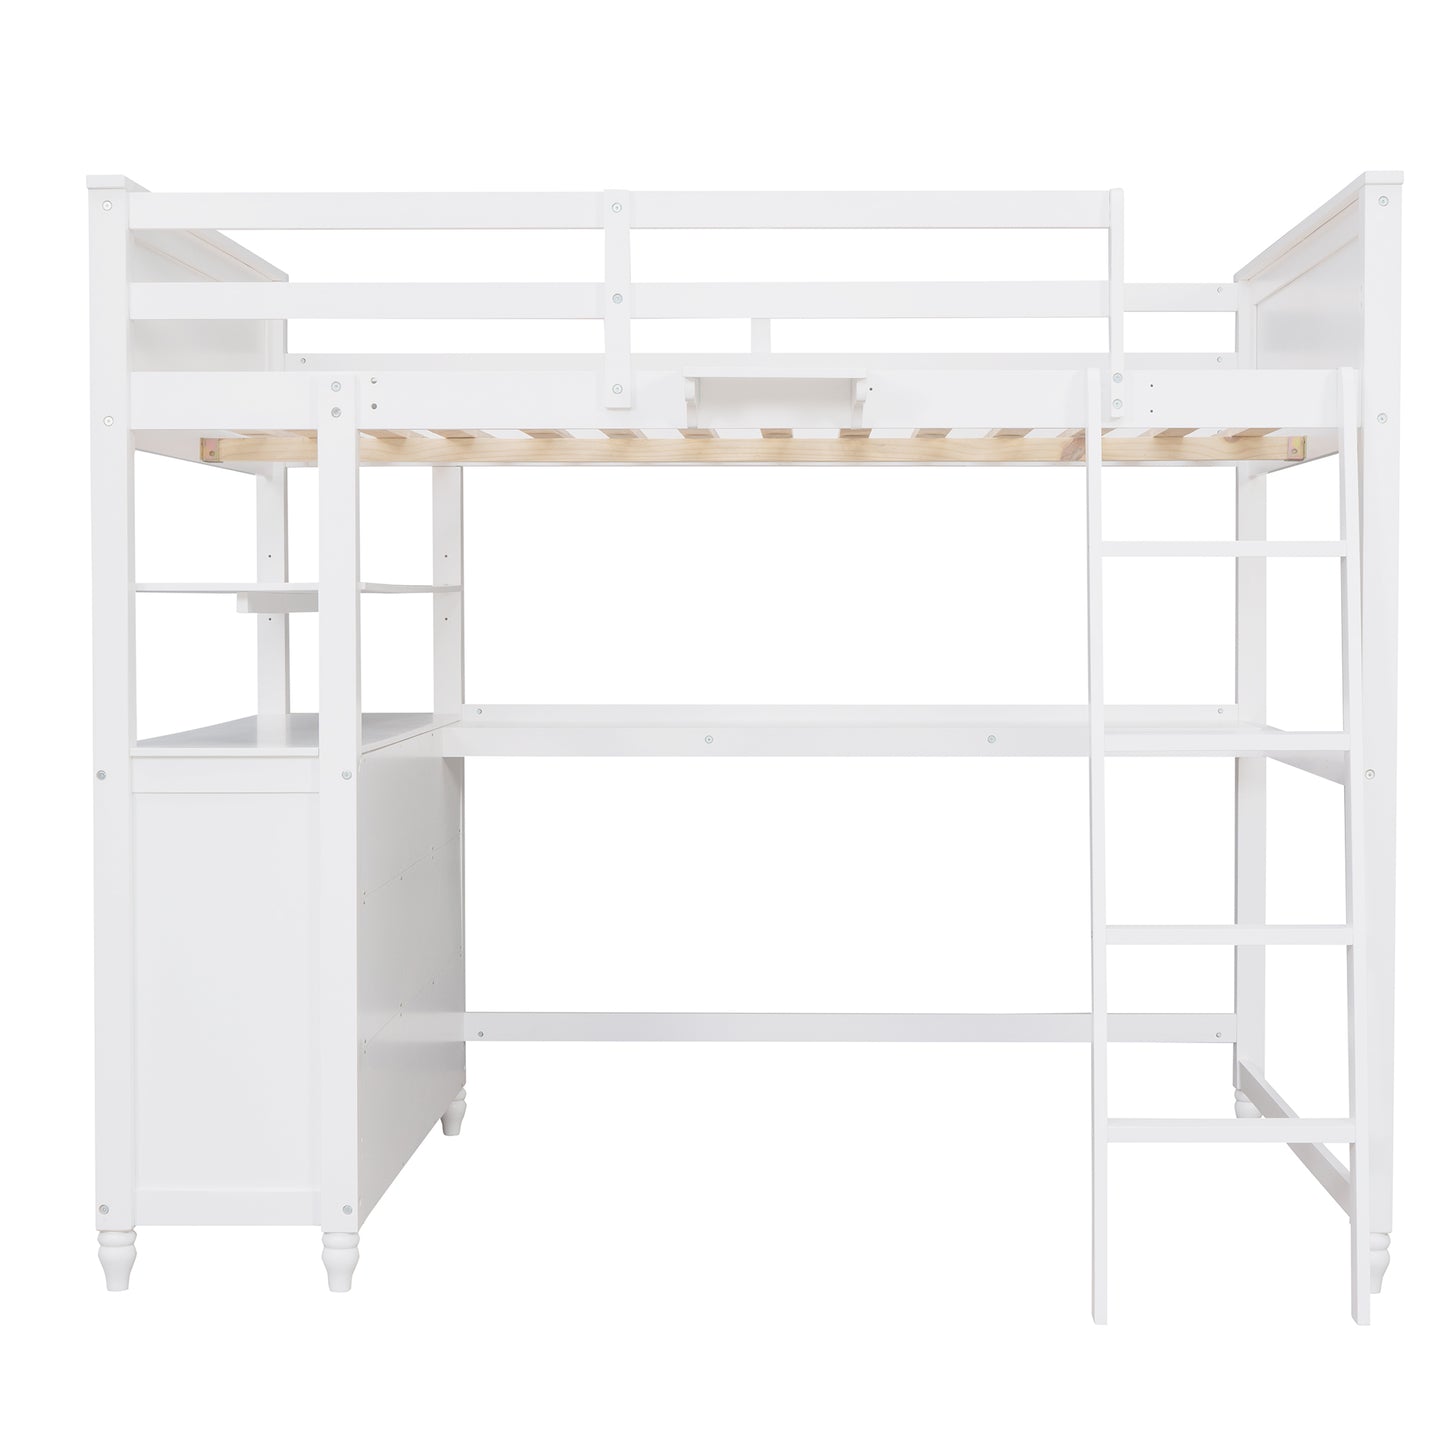 Full size Loft Bed with Drawers and Desk, Wooden Loft Bed with Shelves - White